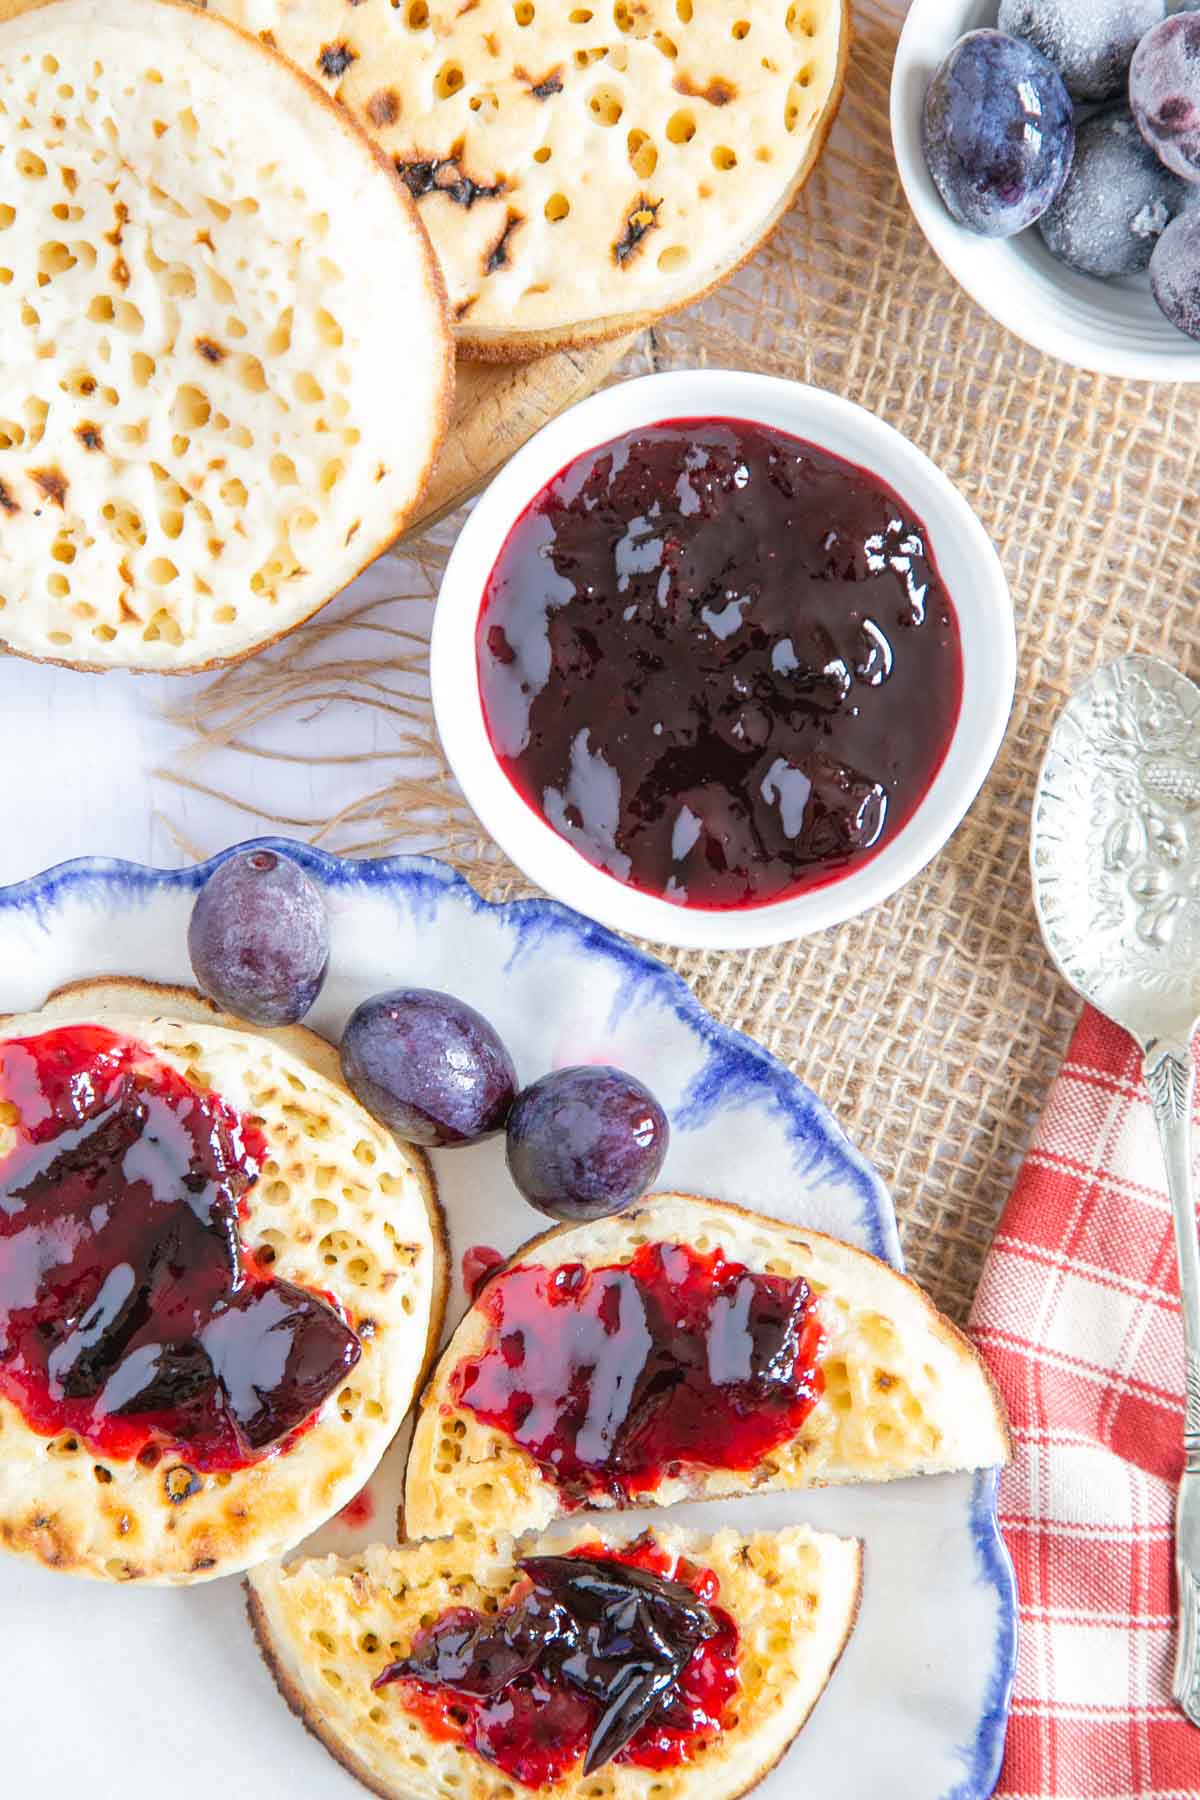 A toasted crumpet spread with butter and damson jam, with more in a small dish next to the plate.